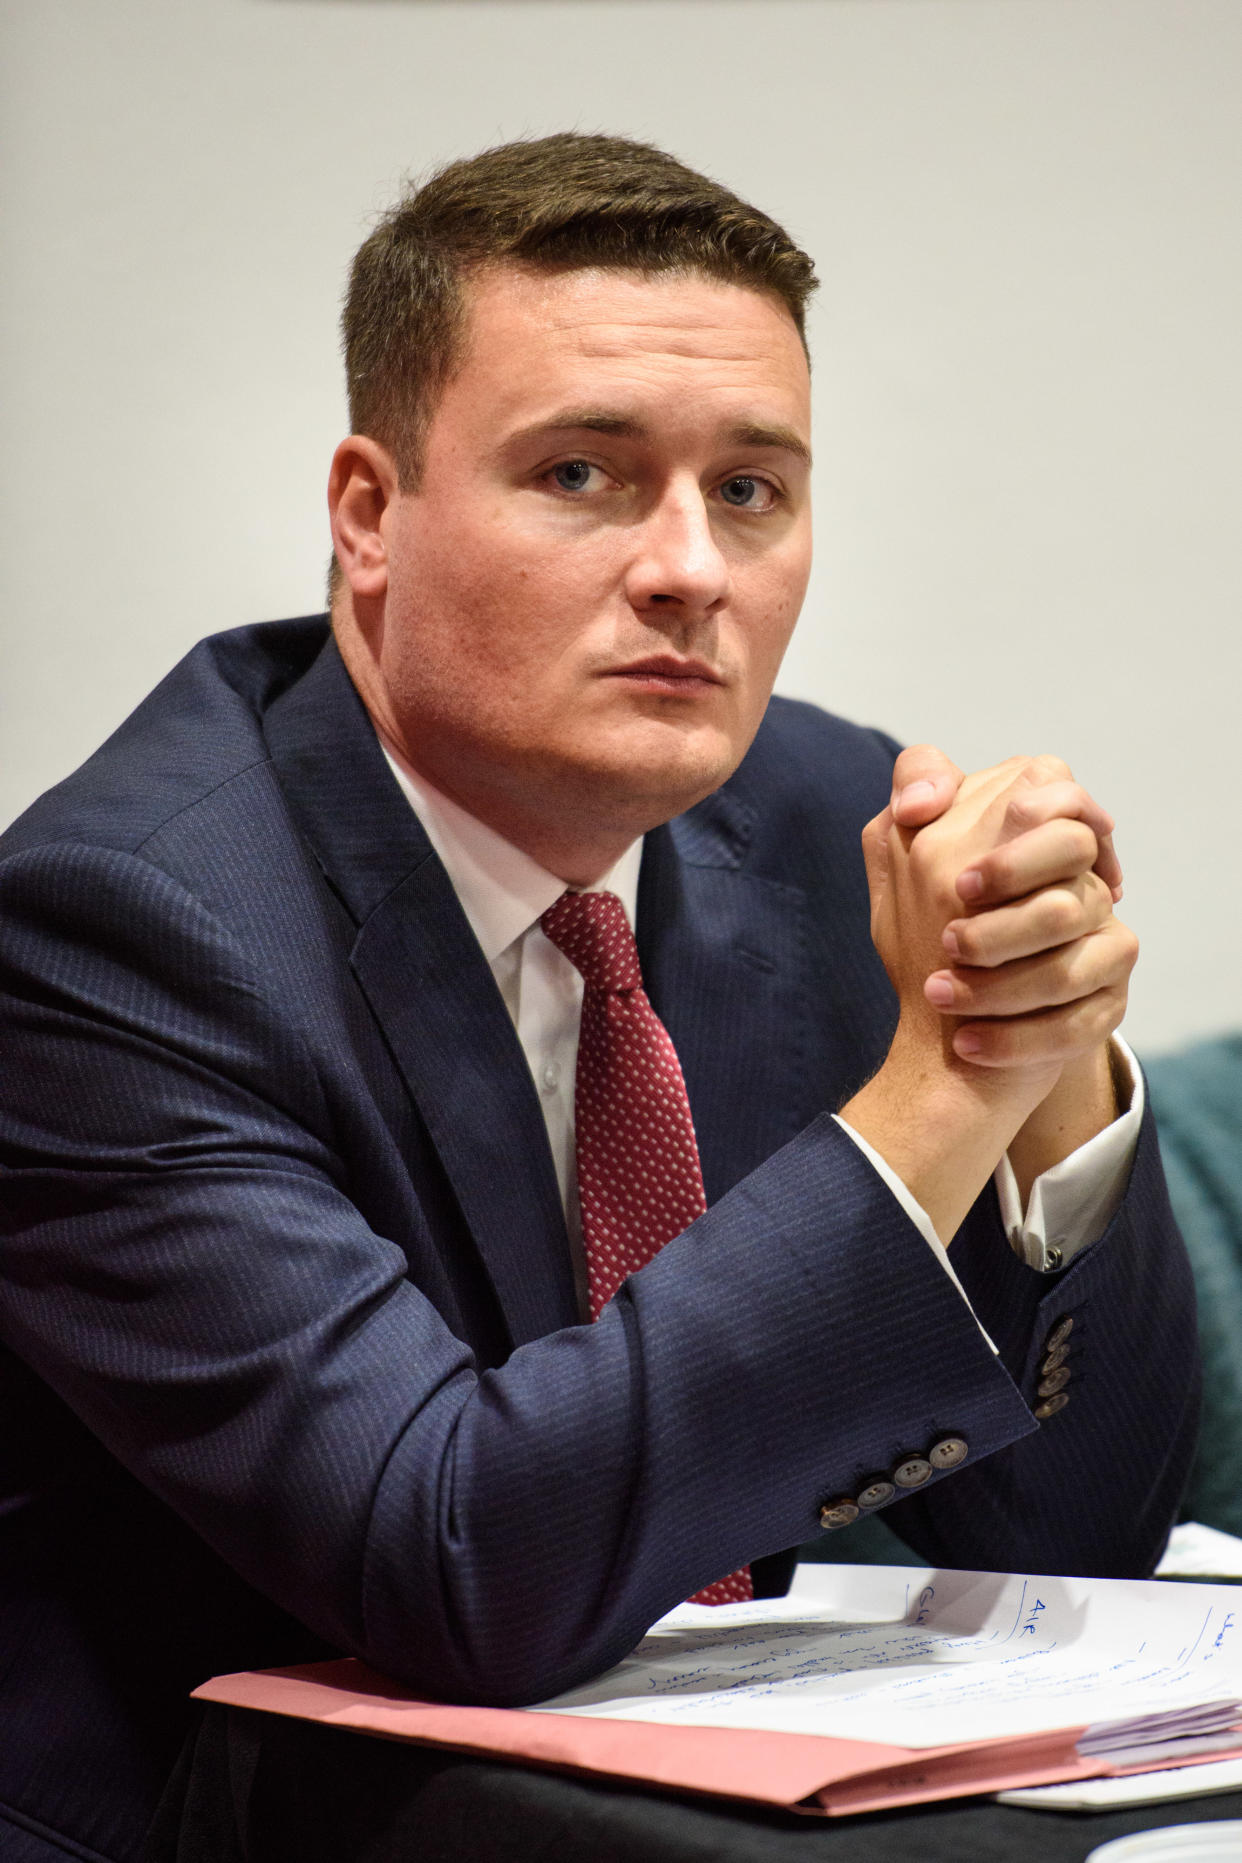 Labour Wes Streeting MP accused the prominent Brexiteer of racism